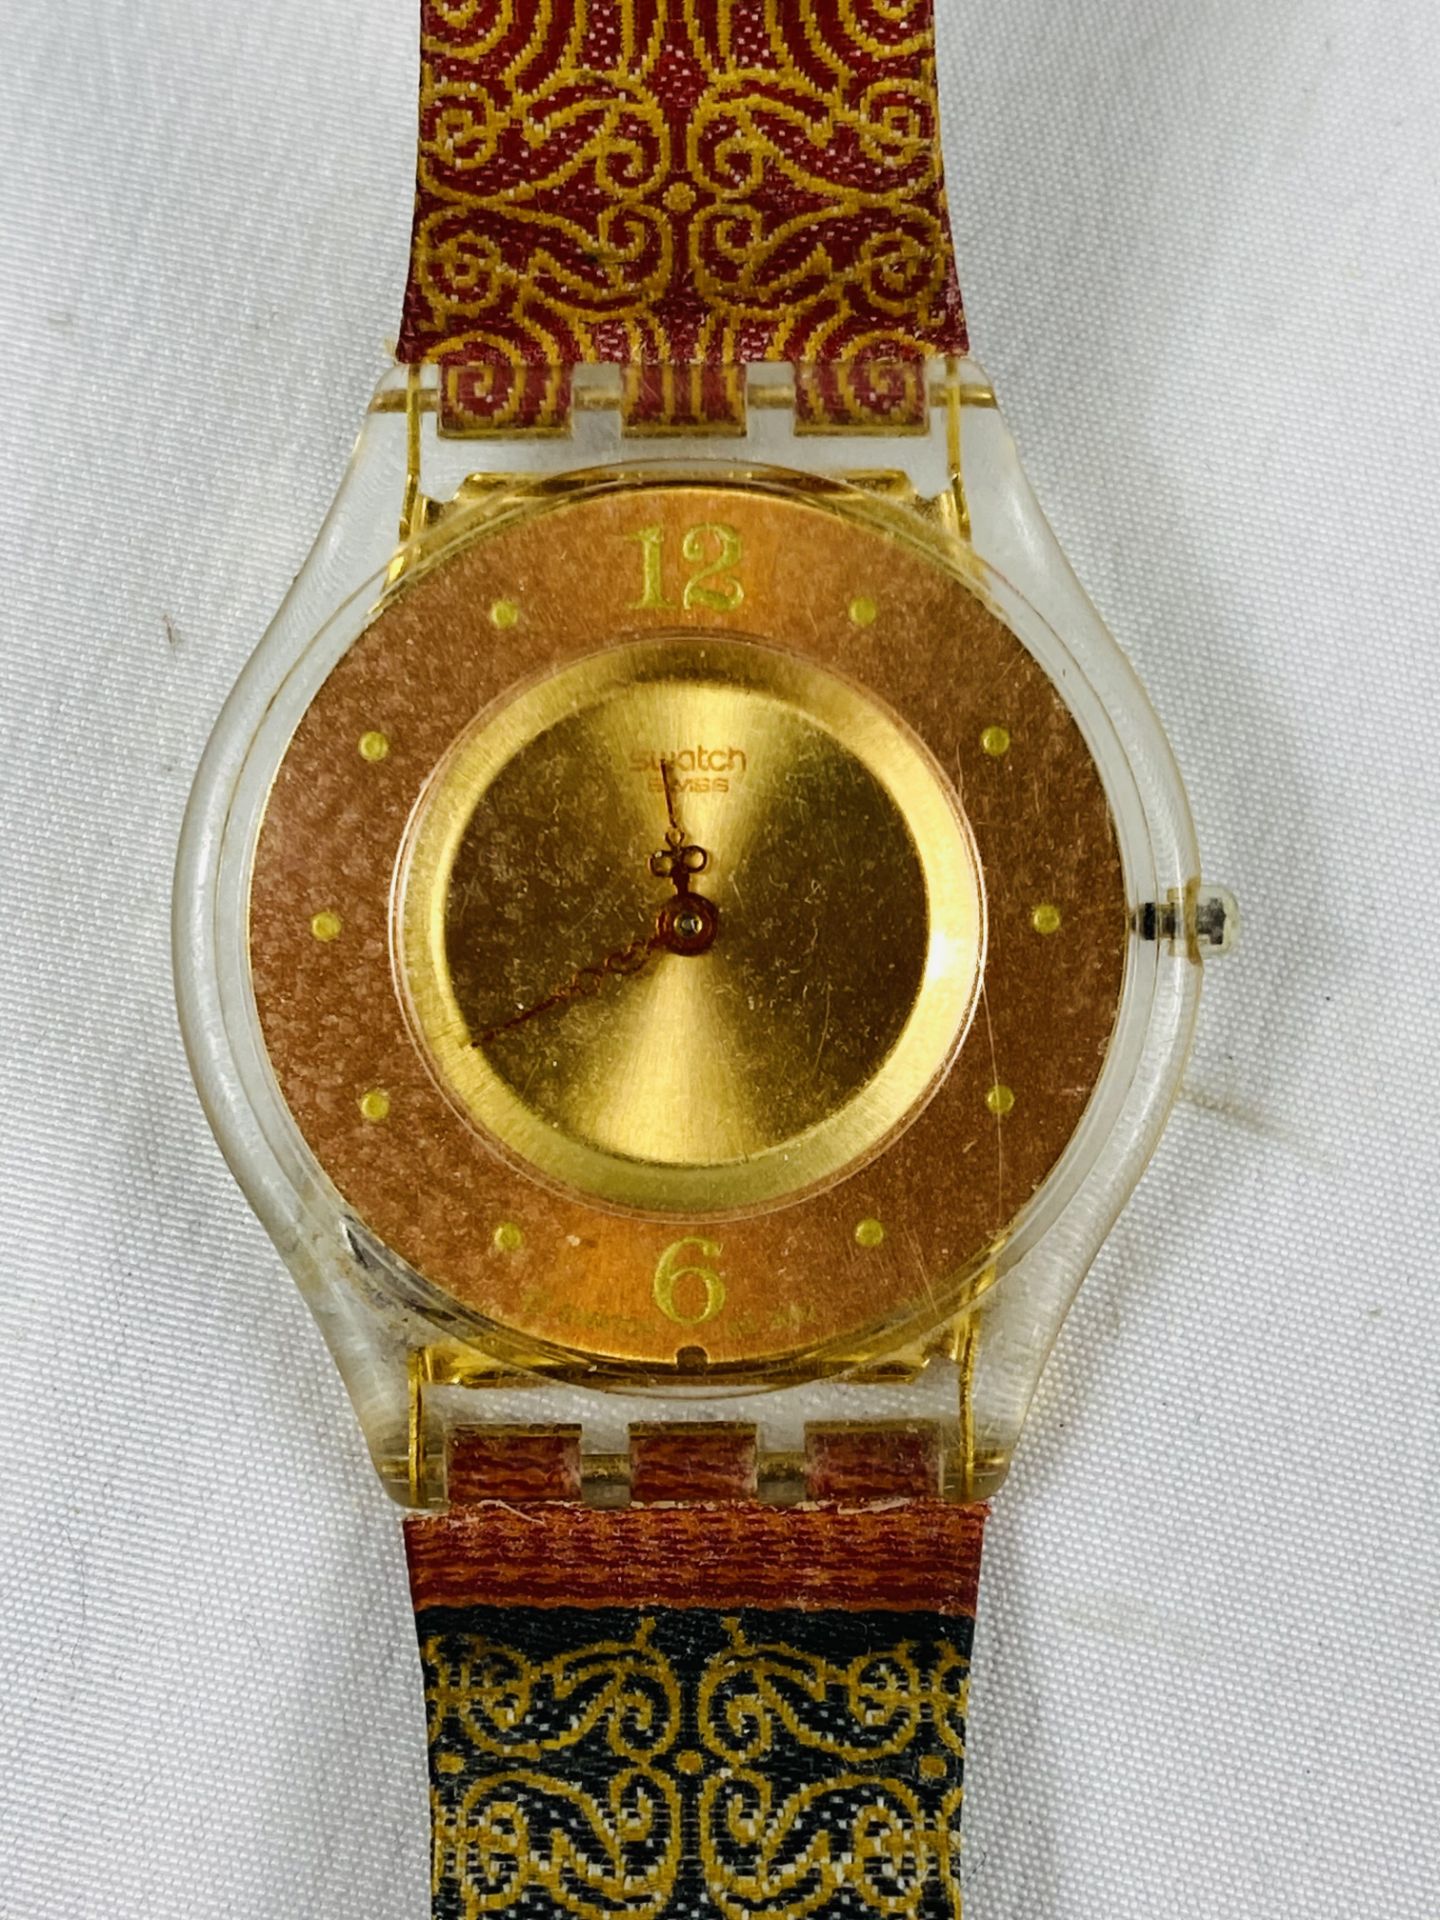 Eleven Swatch watches - Image 8 of 12